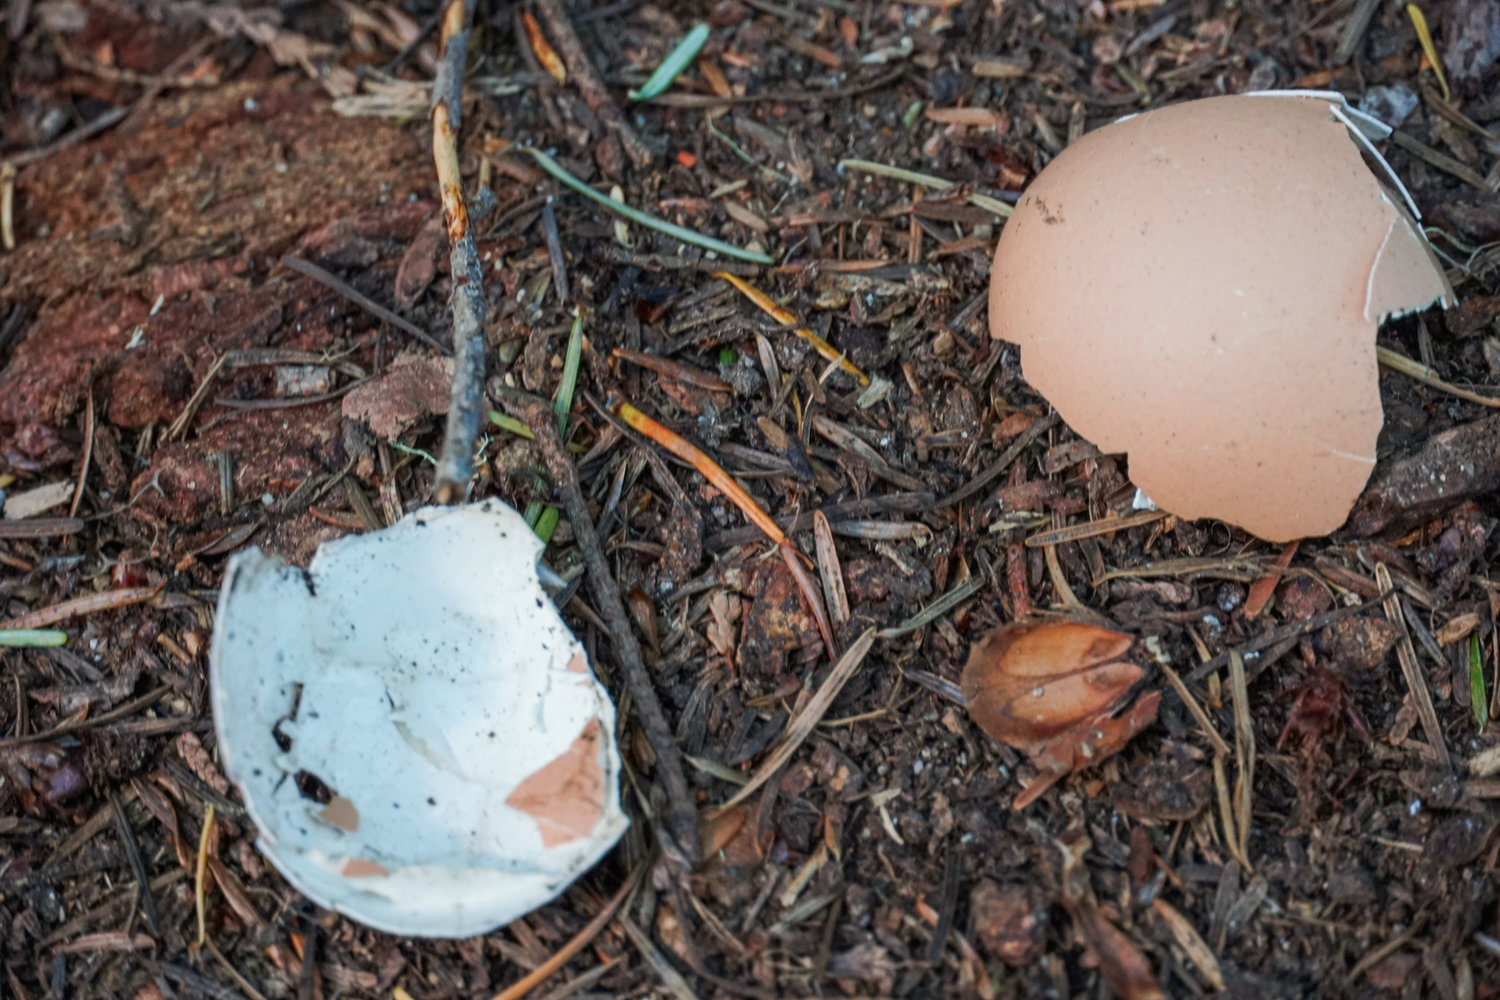 An eggshell is pictured on the forest floor of the Goat Rocks Wilderness along the Packwood Lake Trail on Wednesday in East Lewis County.